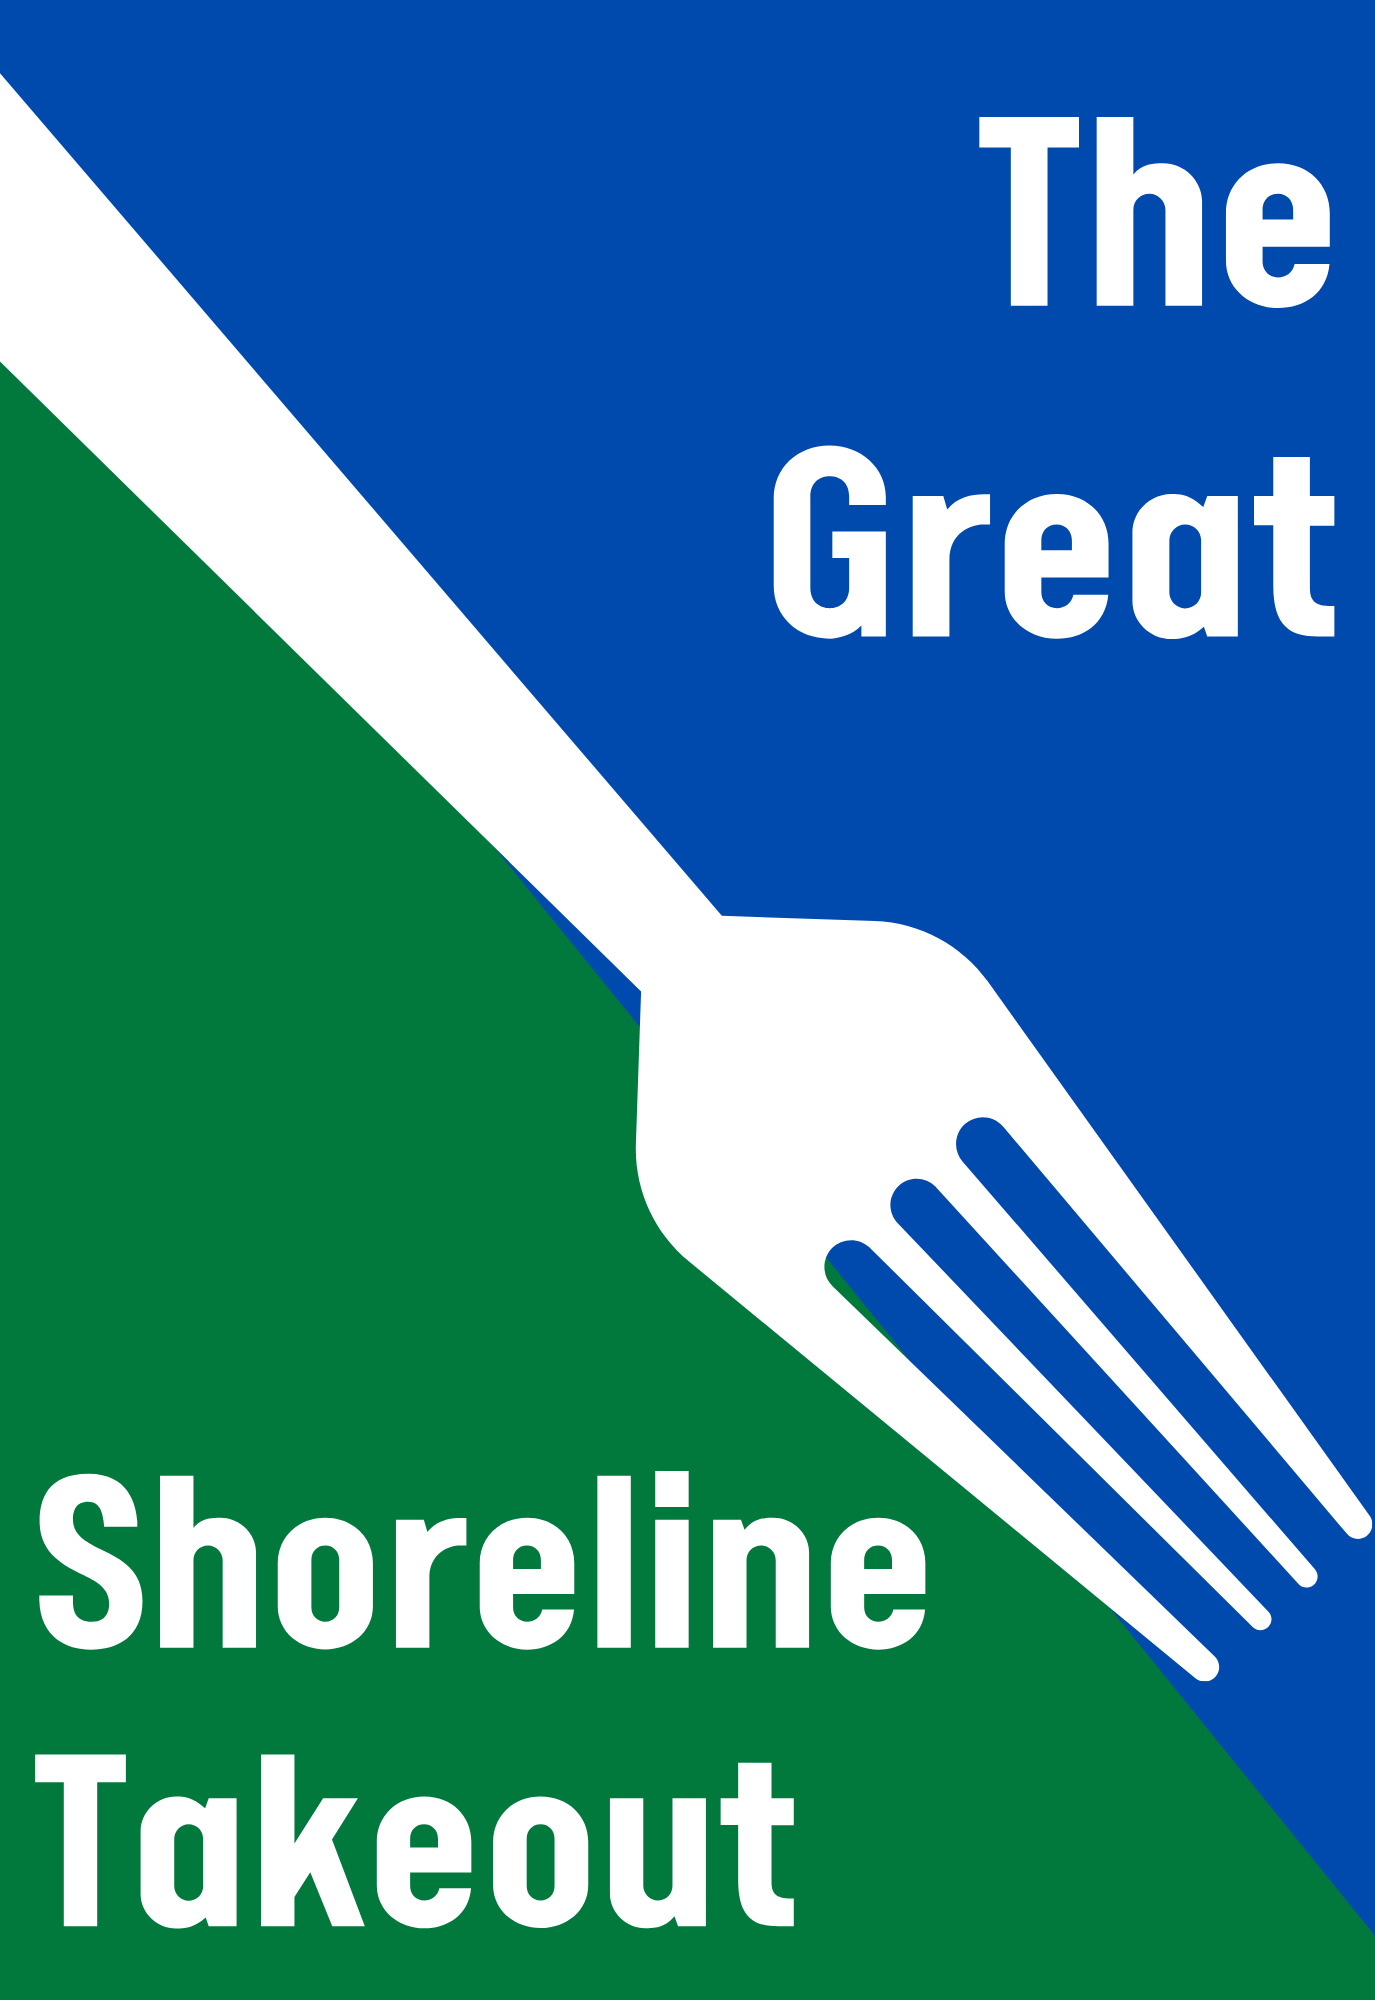 Image for Join #TheGreatShorelineTakeout- Calling all Restaurants and Hungry Customers